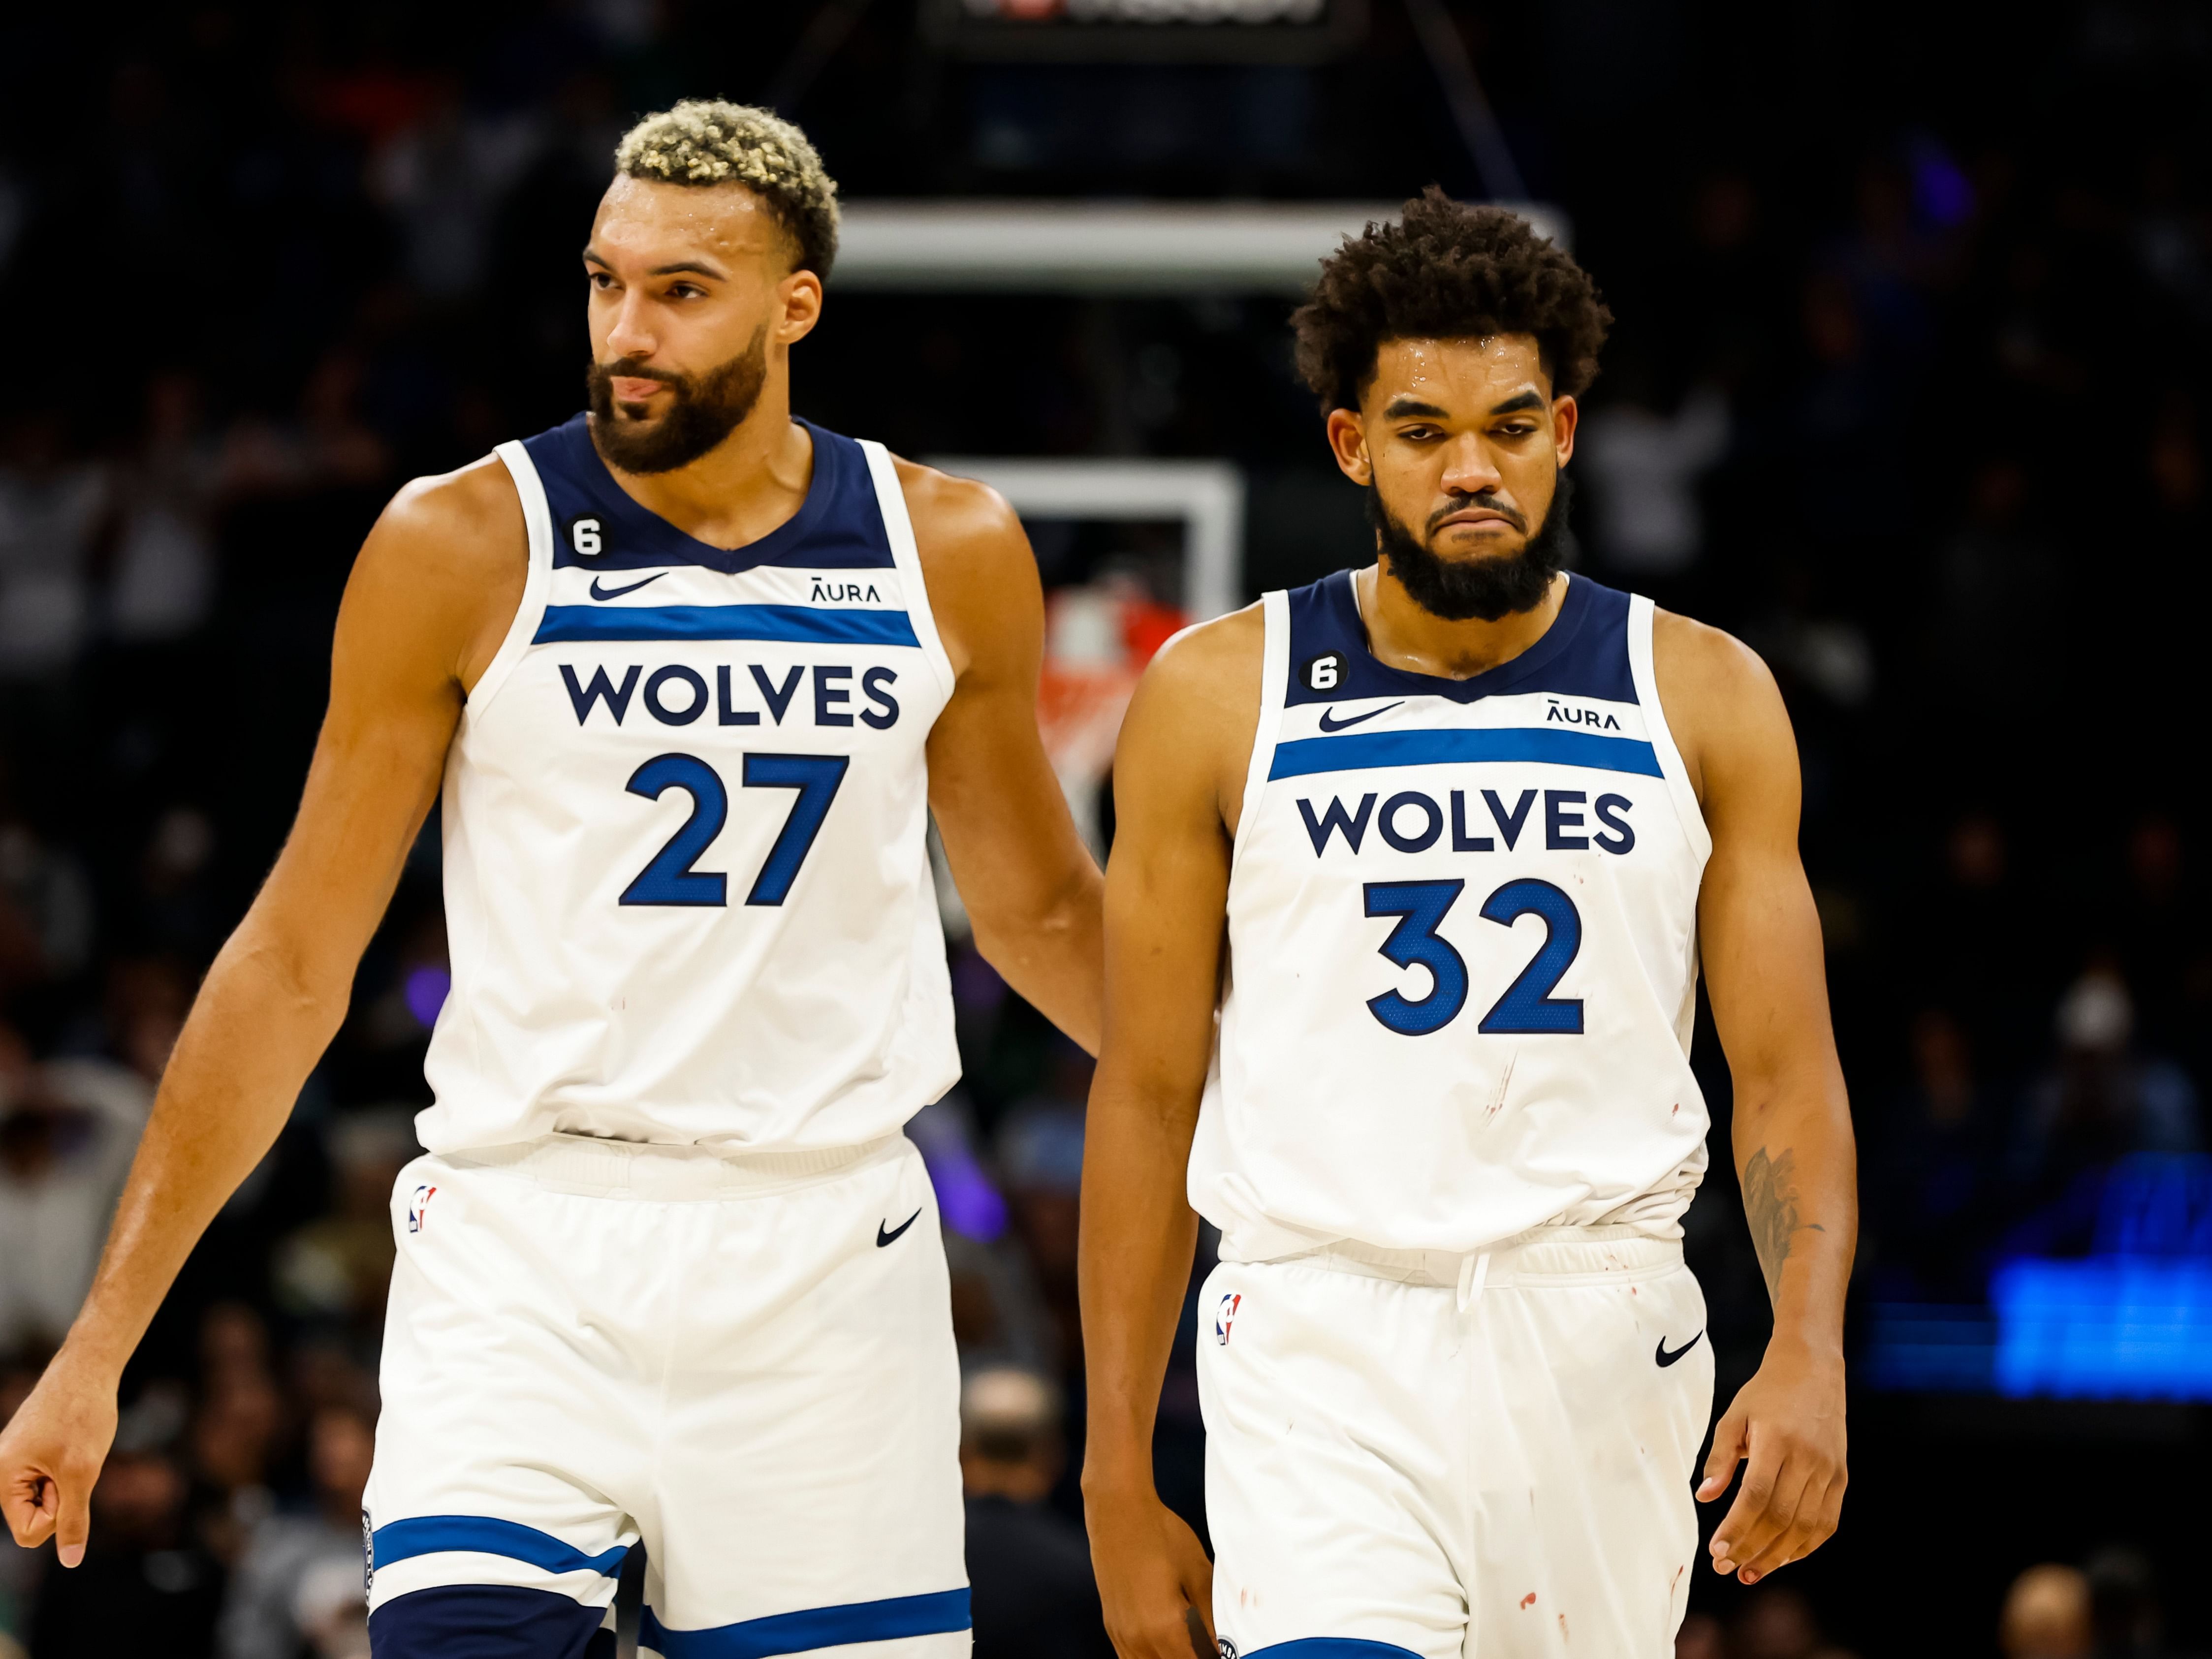 Rudy Gobert and Karl-Anthony Towns